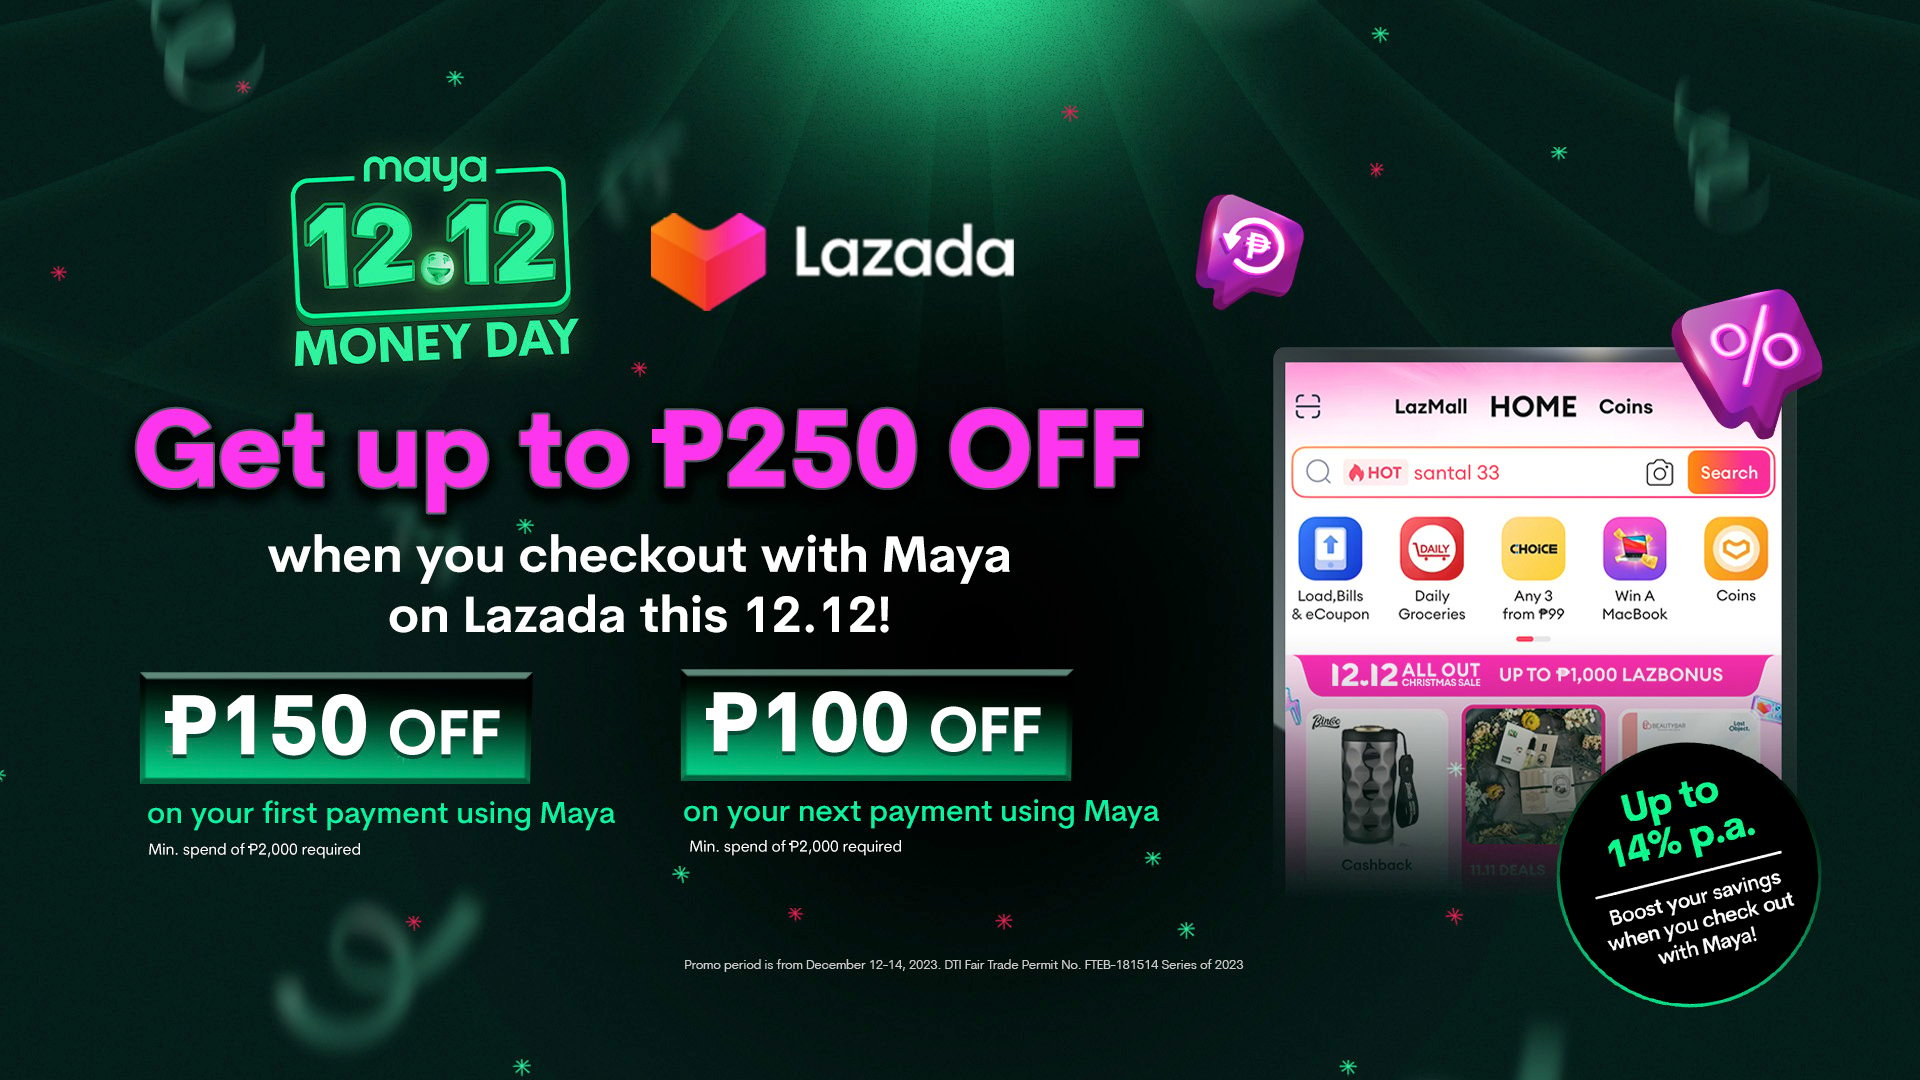 Get up to P250 off when you checkout with Maya this Lazada 12.12!